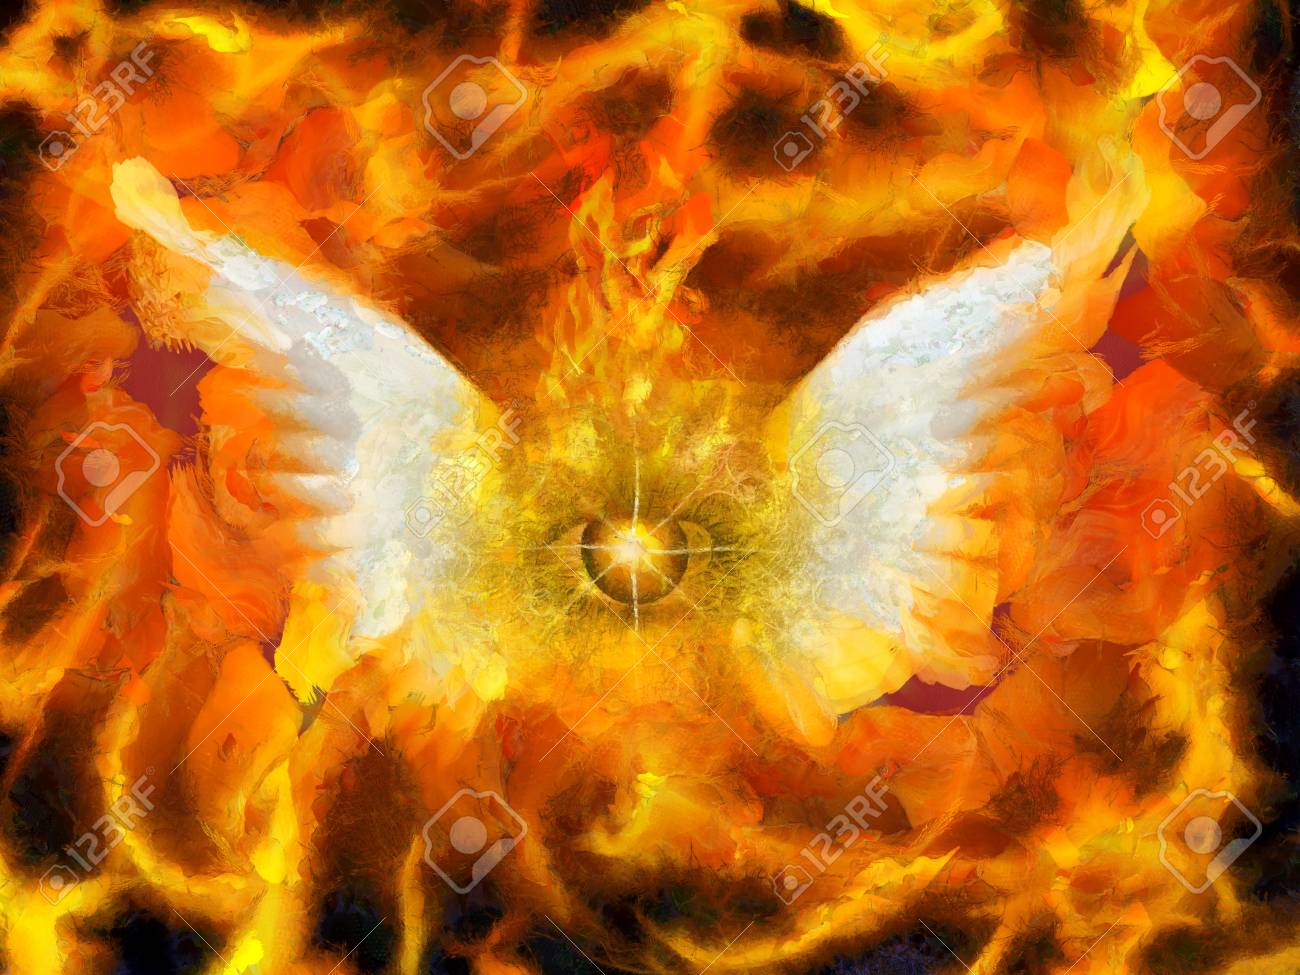 Surreal Painting Burning Eye With Wings Flaming Background